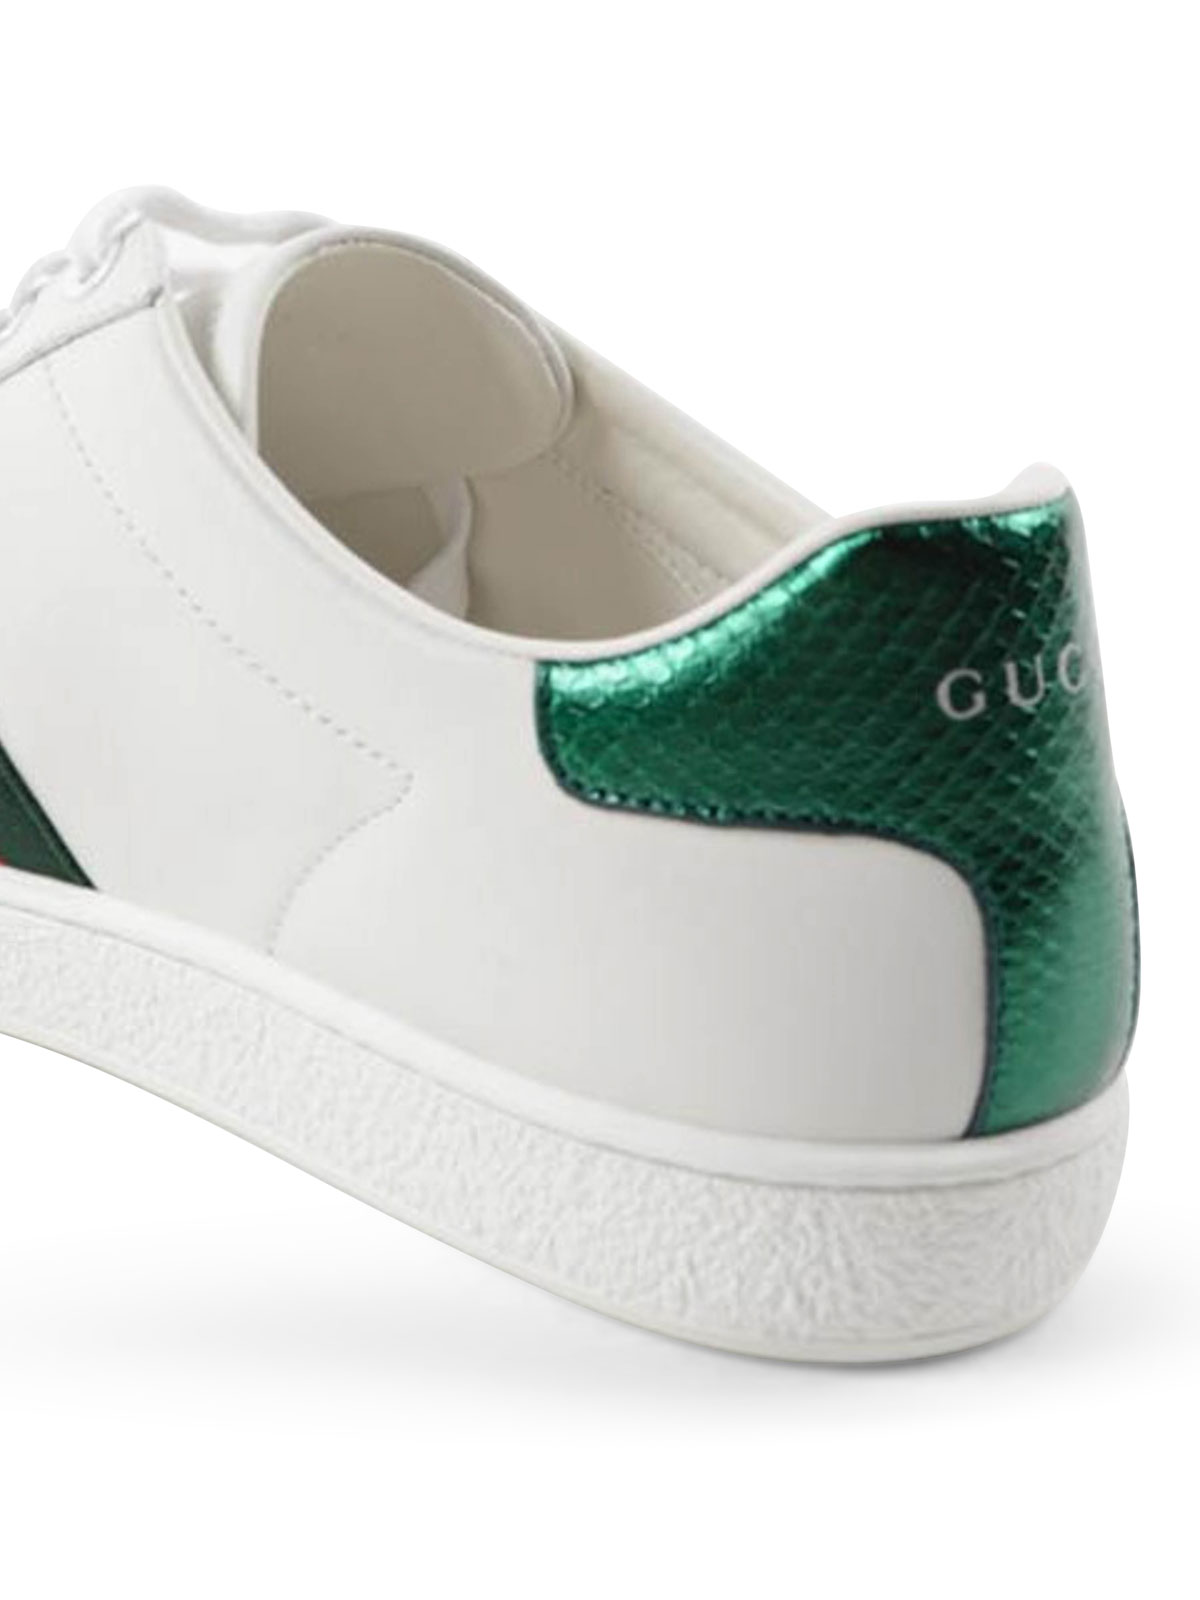 gucci sneakers back